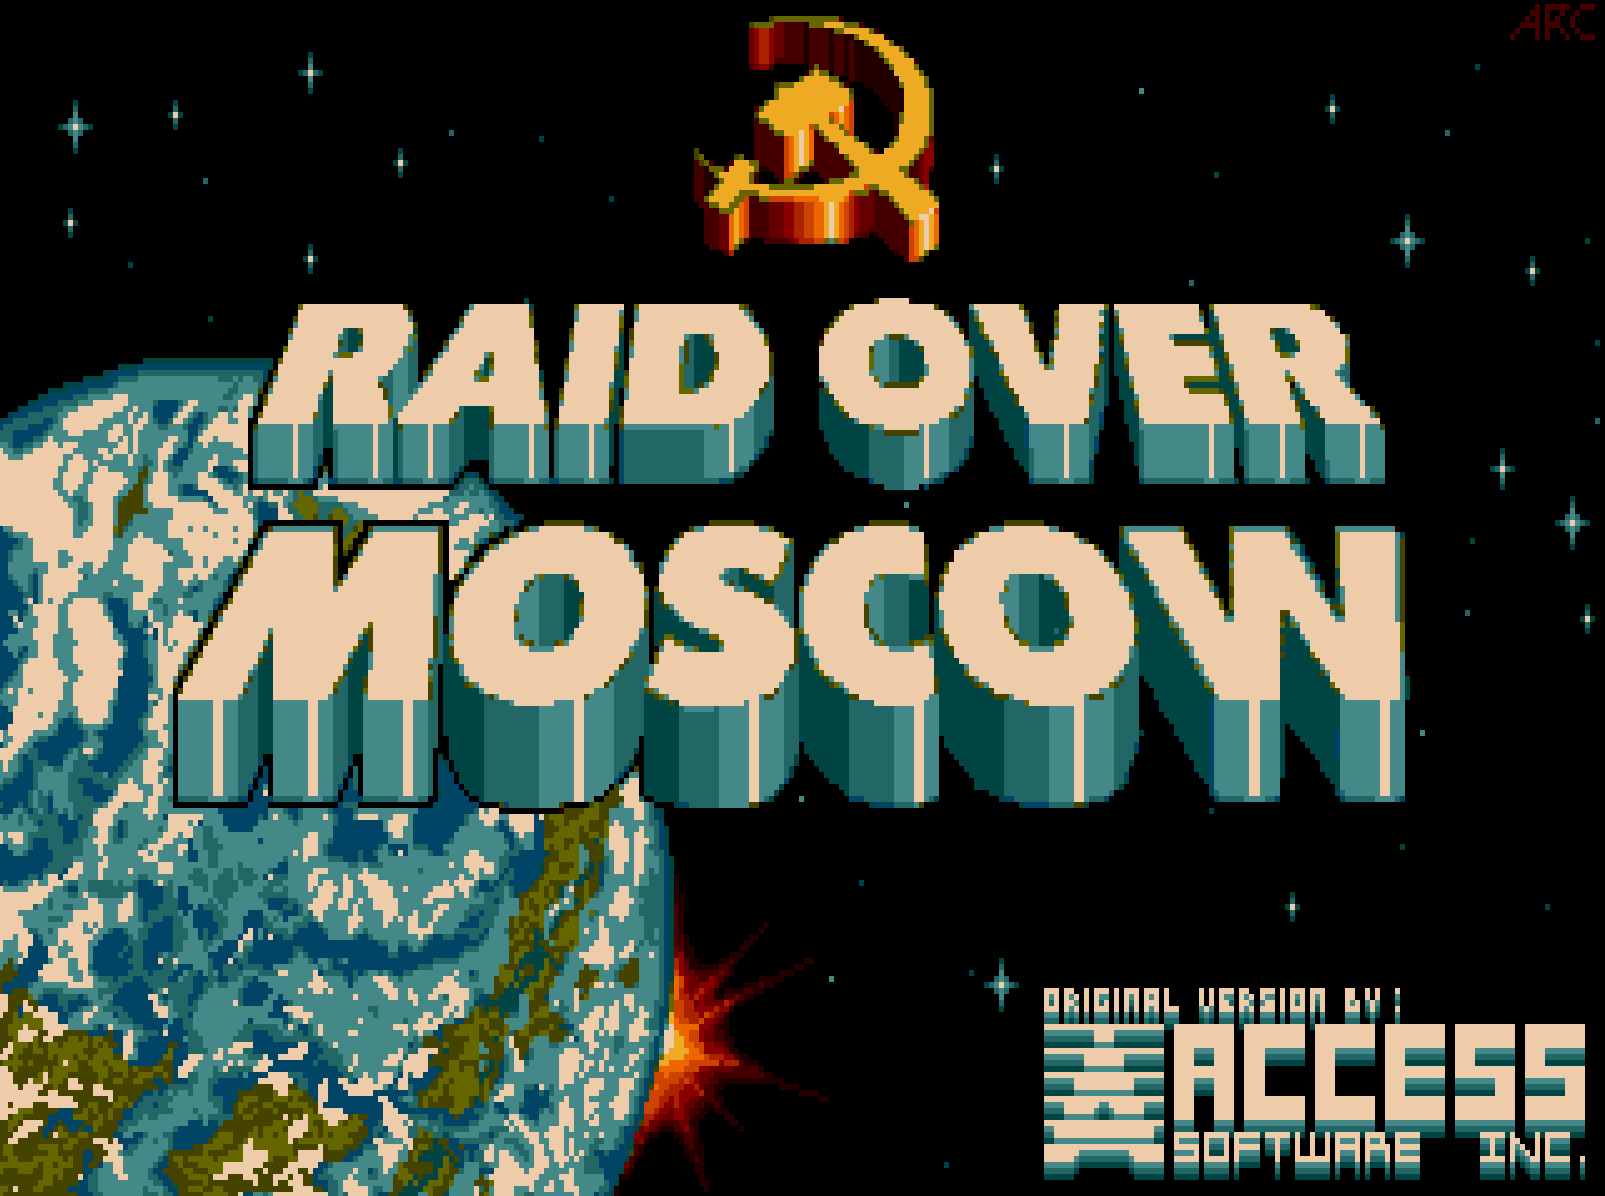 Raid over Moscow: Thrilling Cold War Conquests in Pixelated Skies